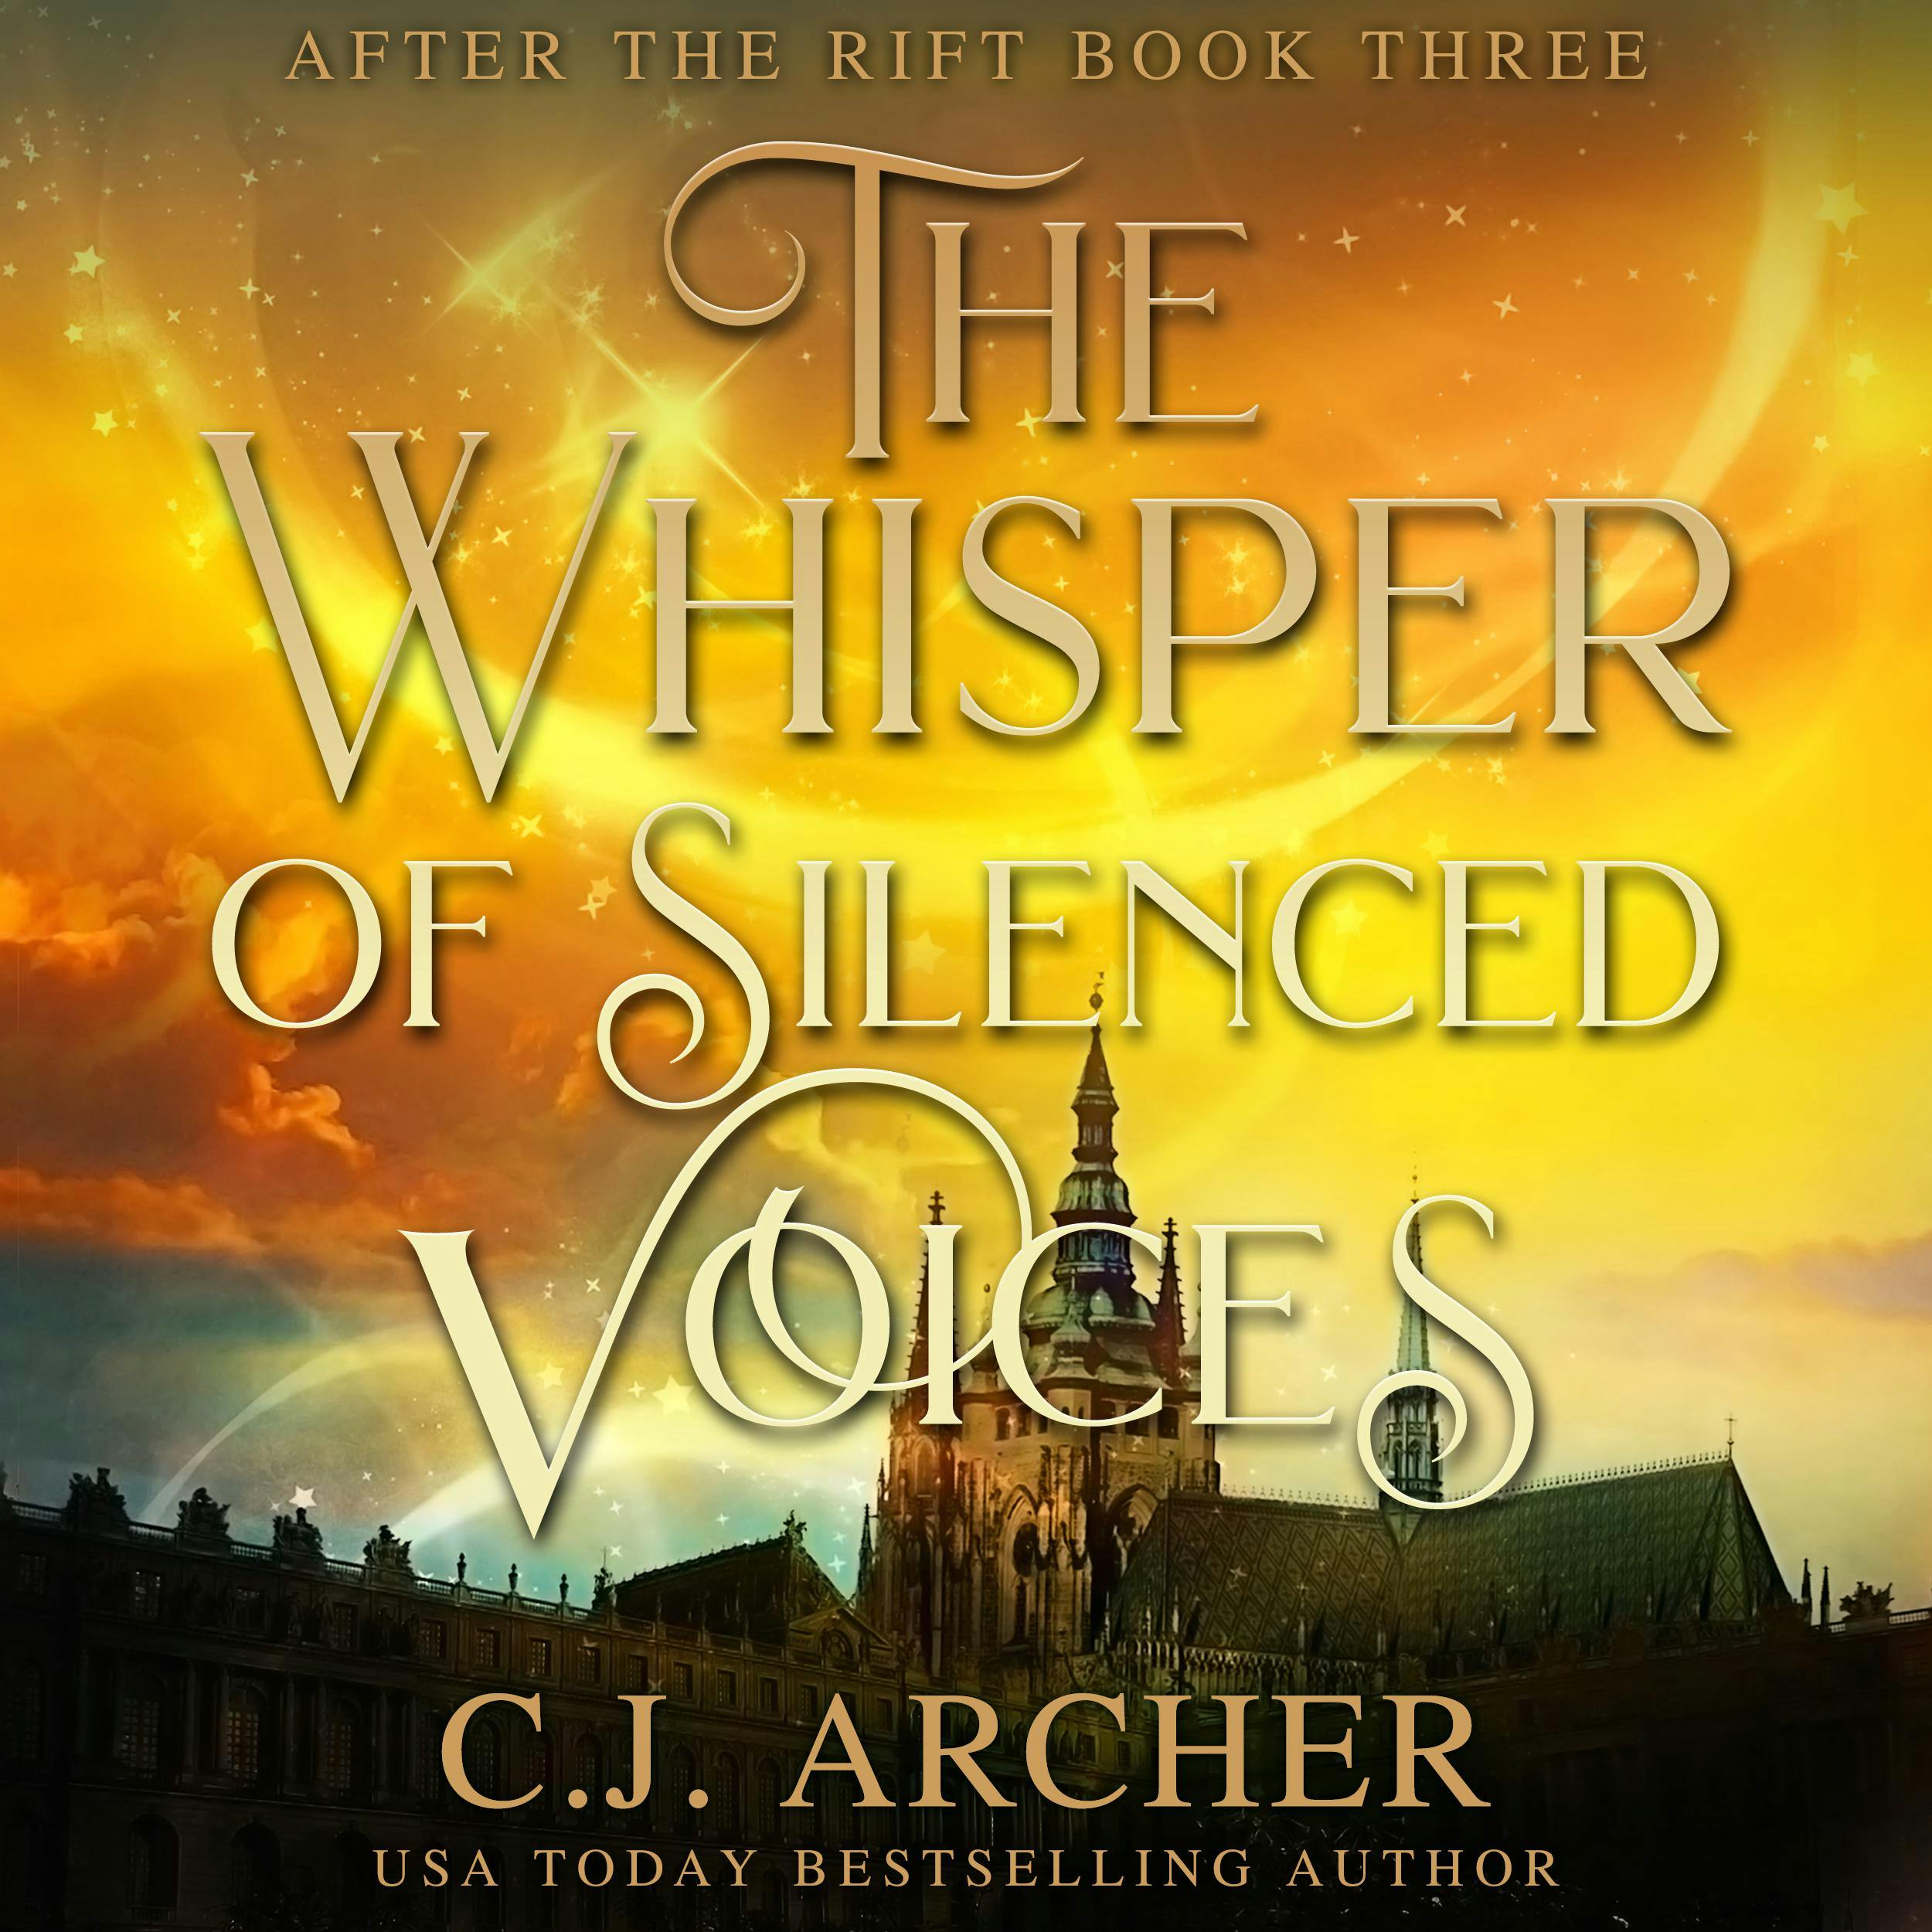 The Whisper of Silenced Voices: After The Rift, book 3 - C.J. Archer